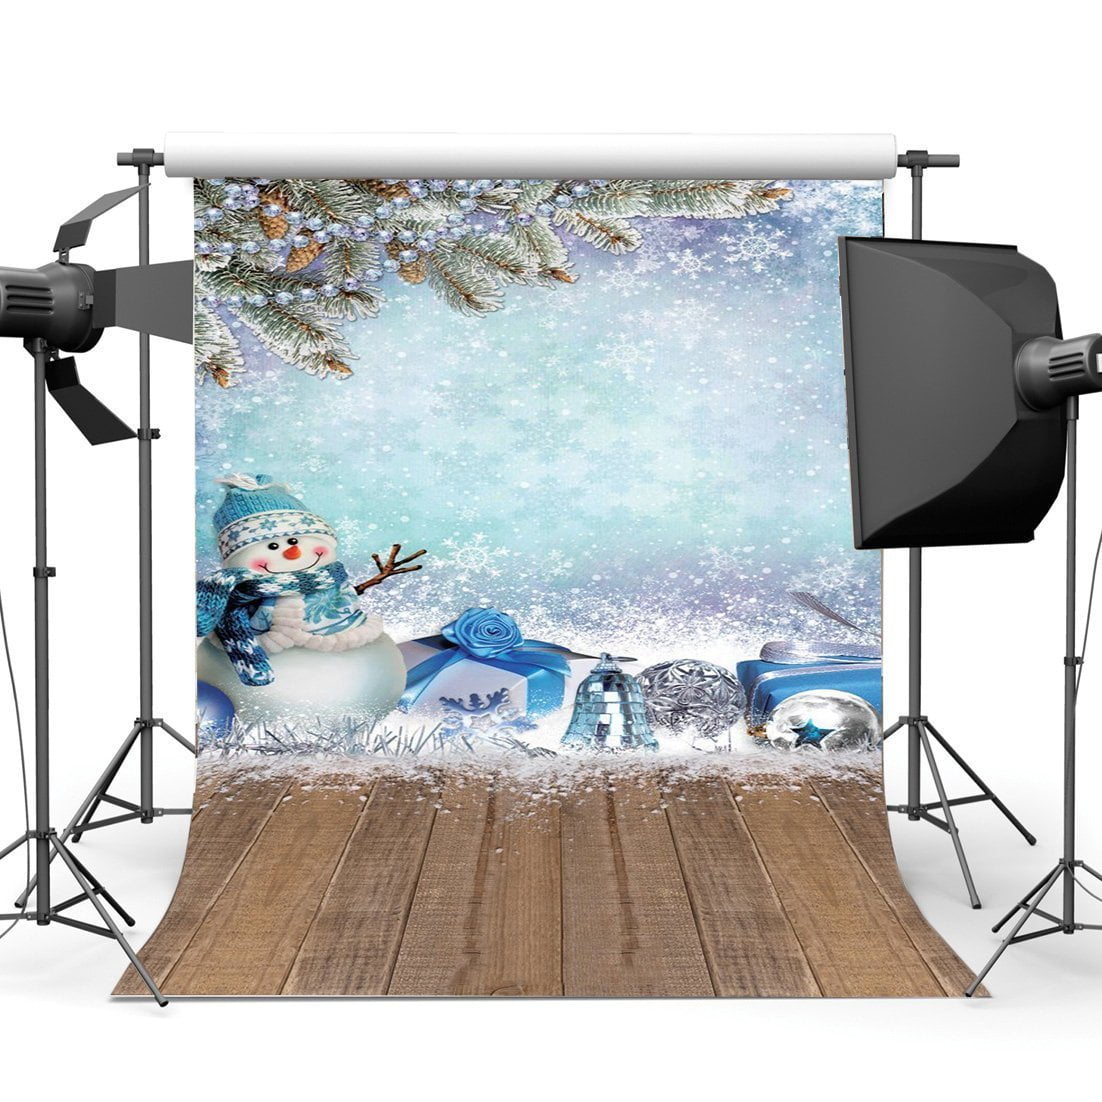 Mohome Polyster 5x7ft Photography Backdrop Merry Christmas Ball Cute